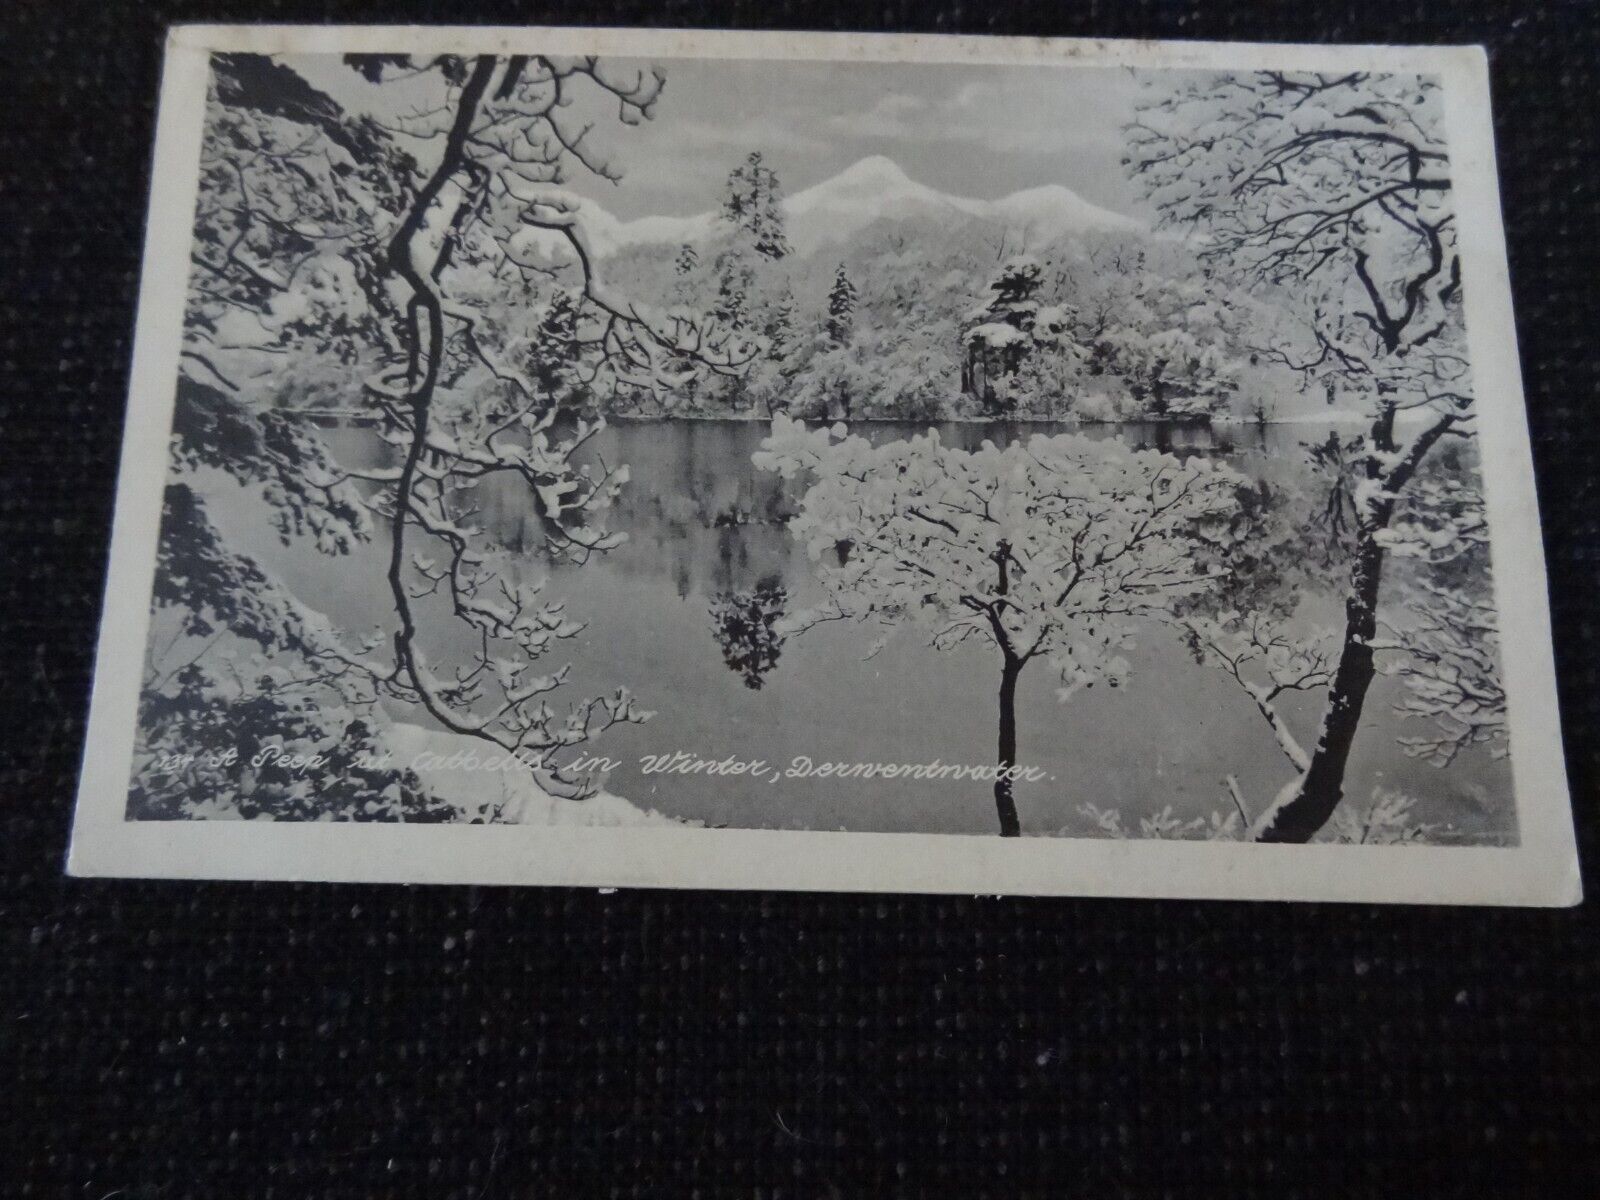 House Clearance - peep at catbells in winter derwentwater service Cumbria - 61500